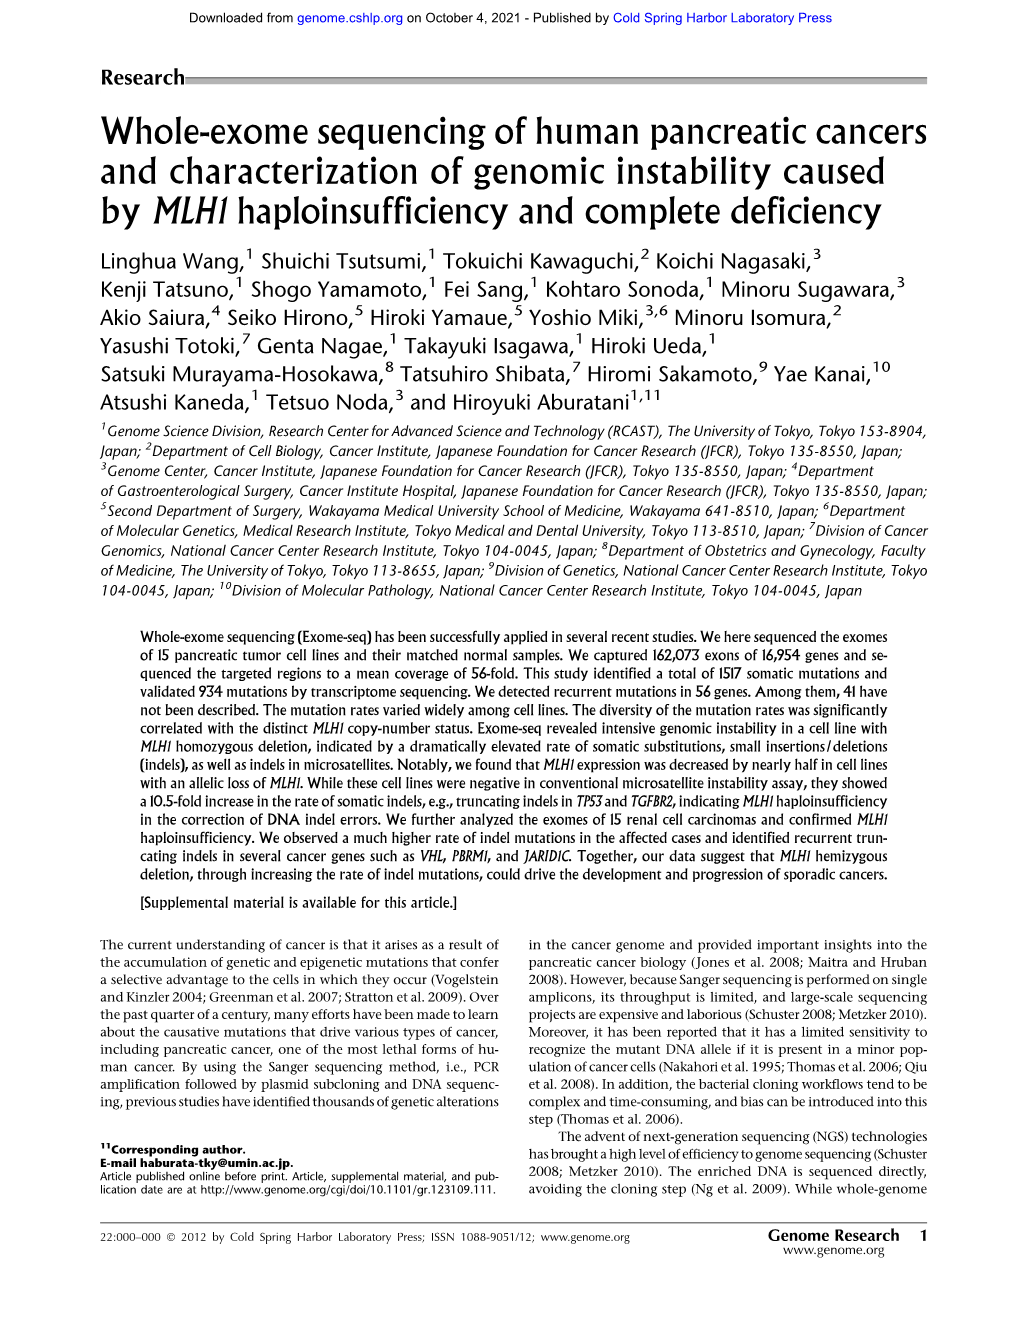 Whole-Exome Sequencing of Human Pancreatic Cancers and Characterization of Genomic Instability Caused by MLH1 Haploinsufficiency and Complete Deficiency